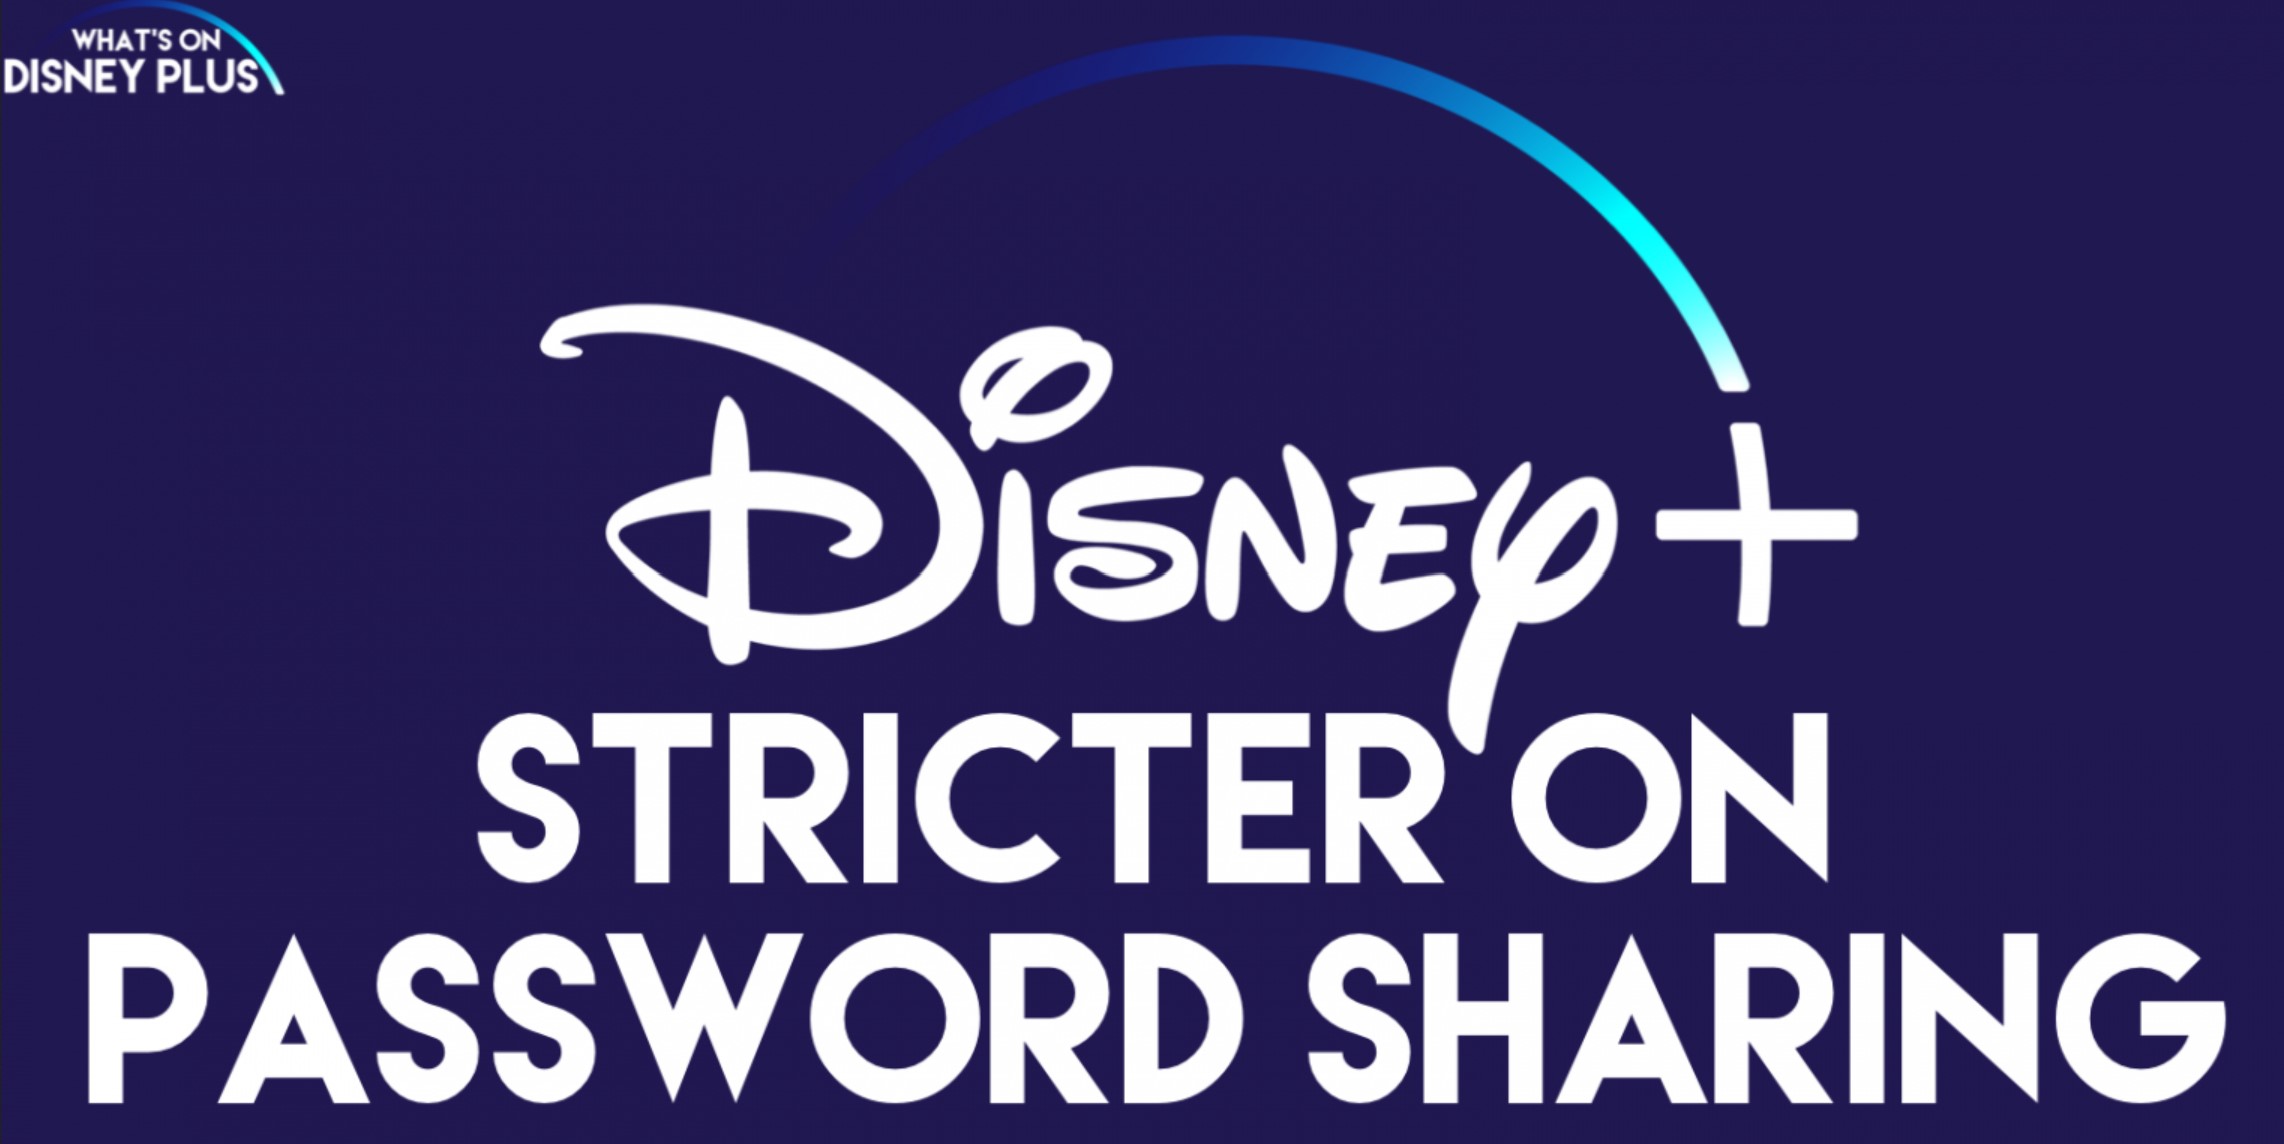 Disney+ will stop password sharing (and more to follow).